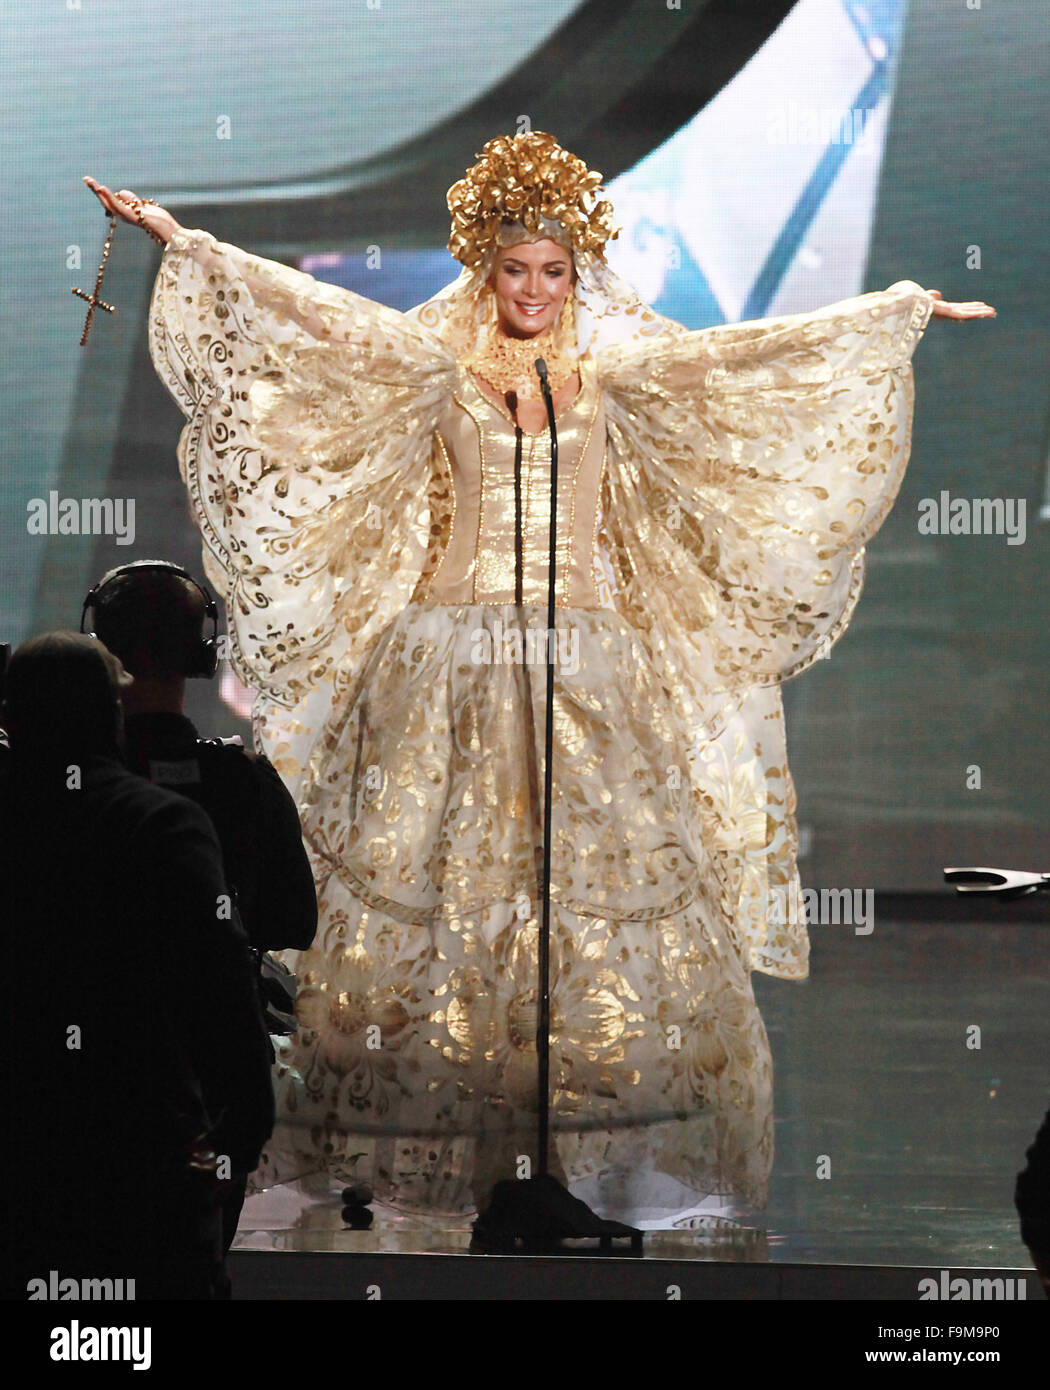 Las Vegas, Nevada, USA. 16th Dec, 2015. Miss Peru Laura Spoya participates in the National Costume Show during the 2015 Miss Universe Pageant Preliminary Competition and National Costume Show on December 16, 2015 at the AXIS Theater inside Planet Hollywood Resort & Casino in Las Vegas Nevada. Credit:  Marcel Thomas/ZUMA Wire/Alamy Live News Stock Photo